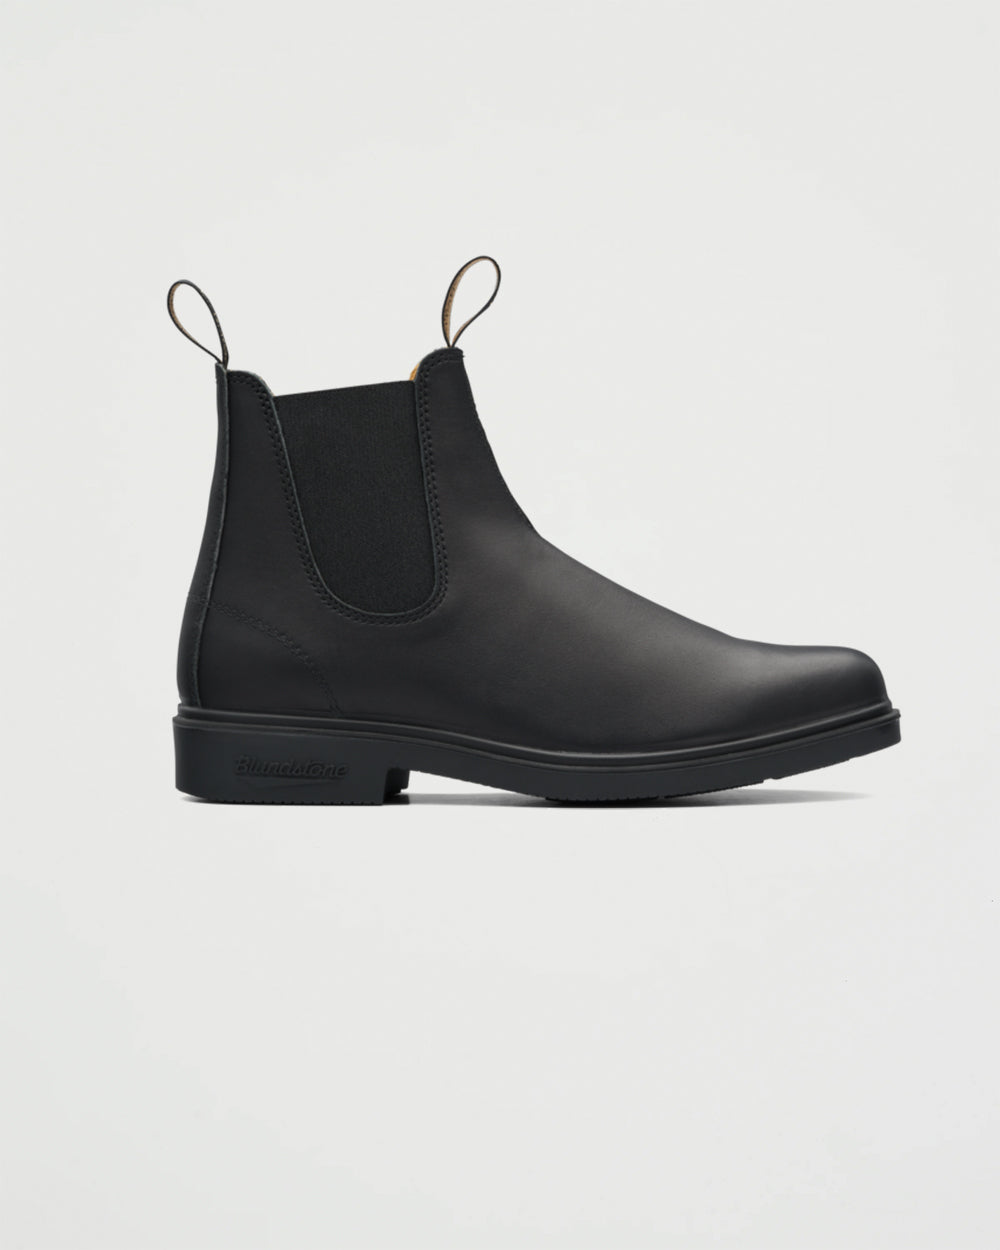 Blundstone 068 Dress Boot Black Shoes Leather Unisex